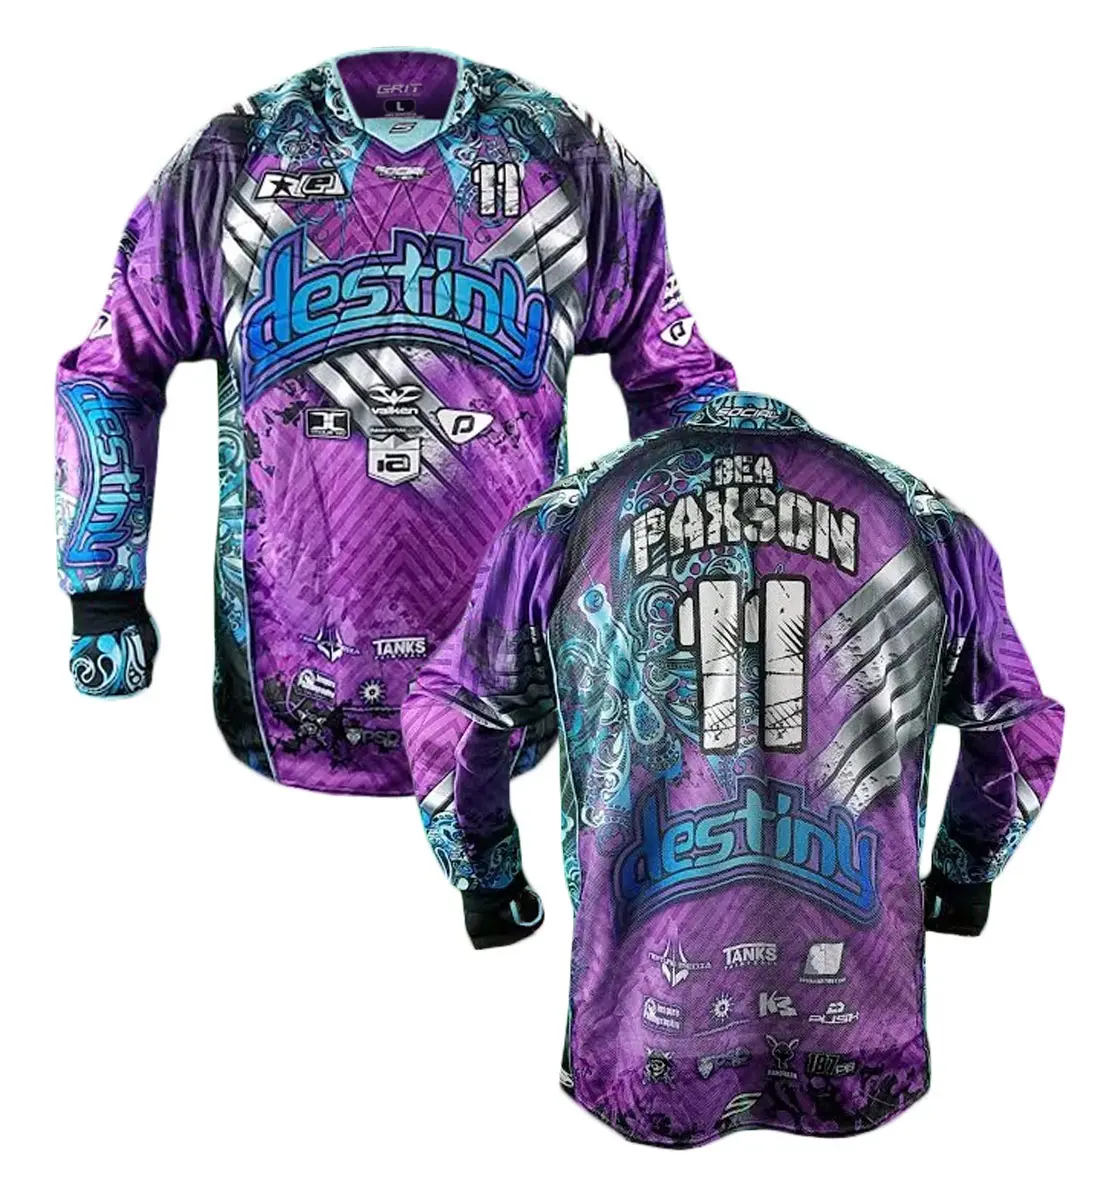 Gewohnheit ihre logo made China hk surge teal tops personalizado sublimation camo paintball jersey